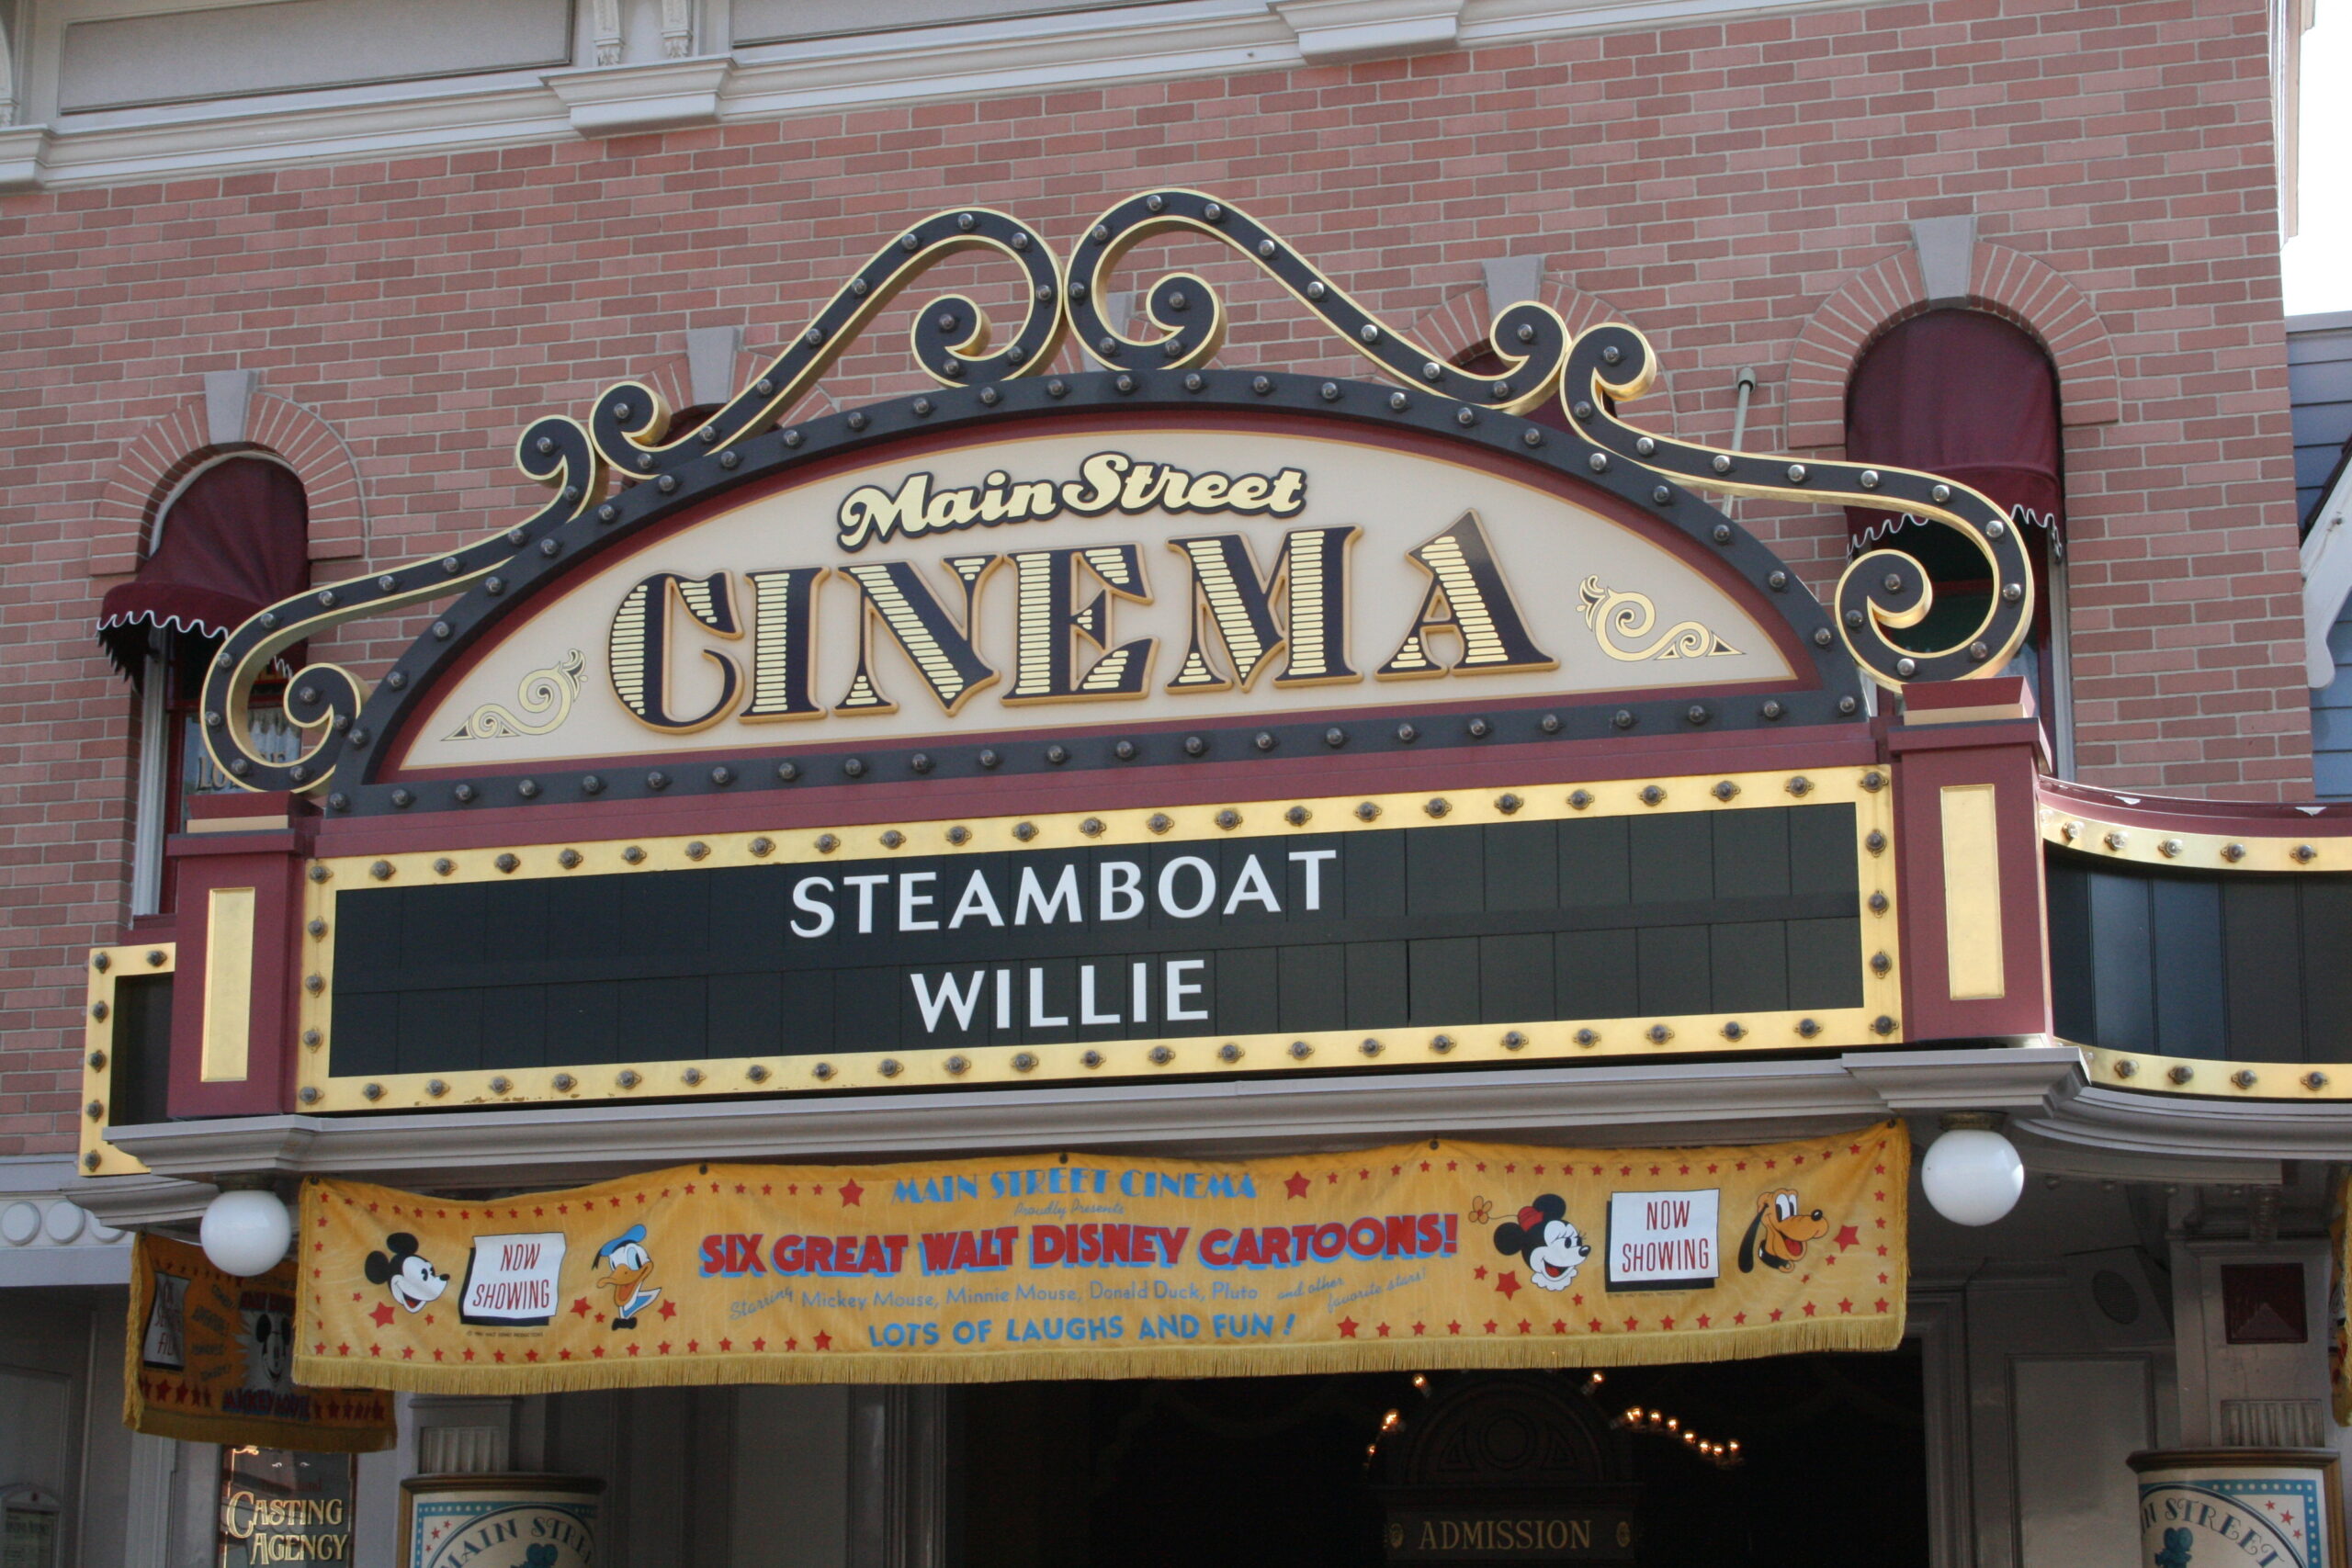 Steamboat Willie, the first Mickey Mouse cartoon with sound, can be seen at the Main Street Cinema in Disneyland.